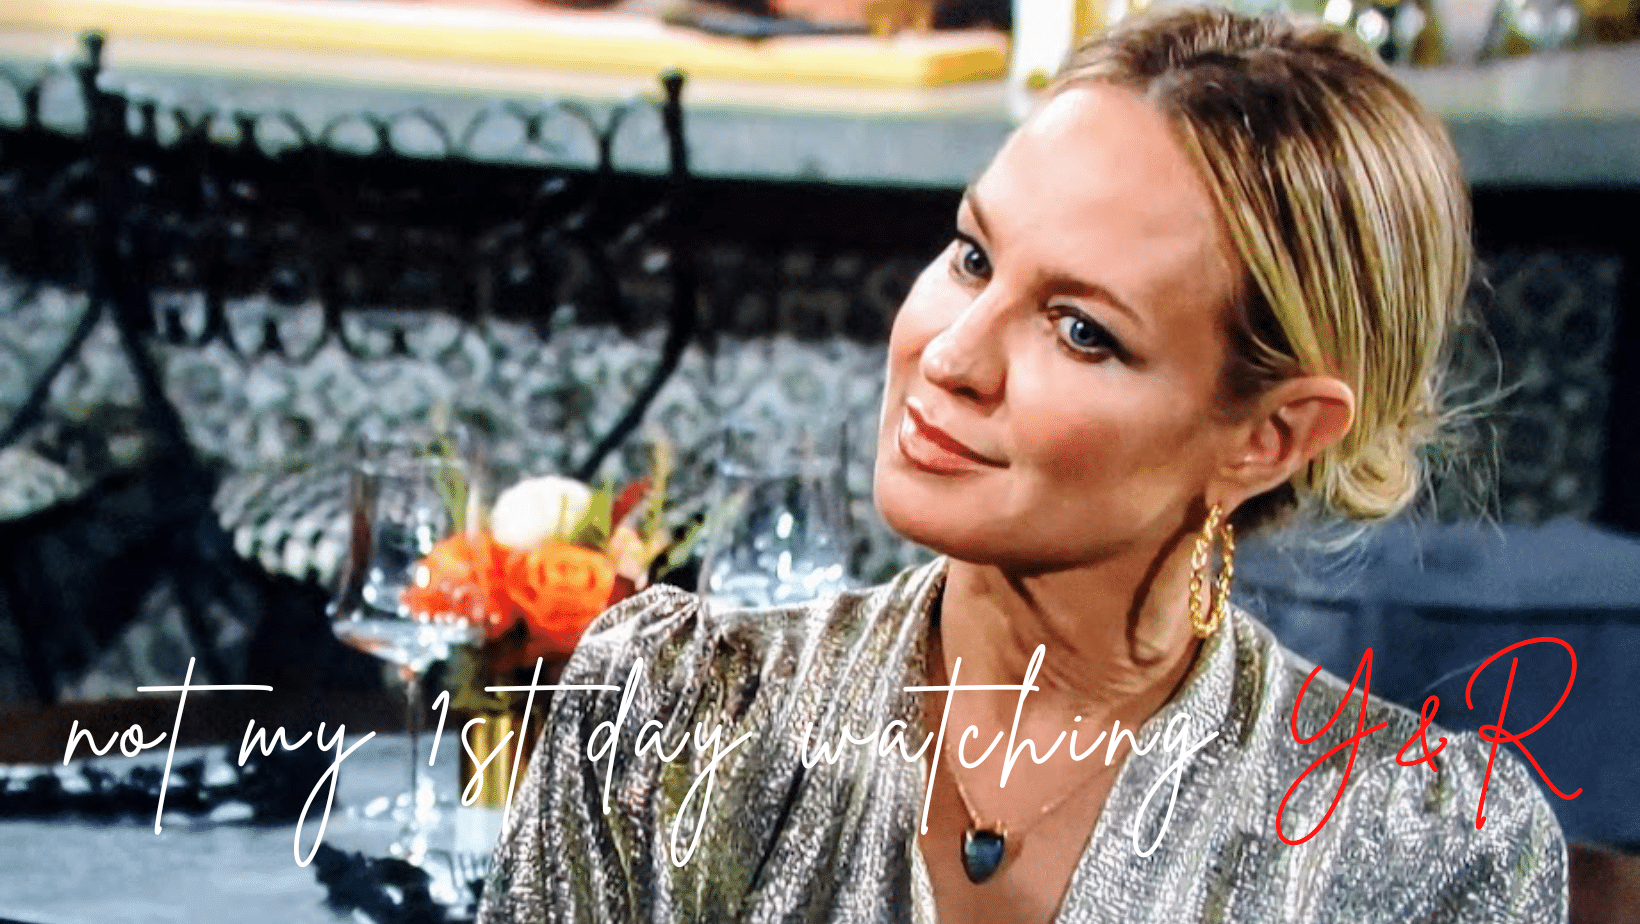 Sharon at Crimson Lights | Always Stirring the Pot on The Young & the Restless